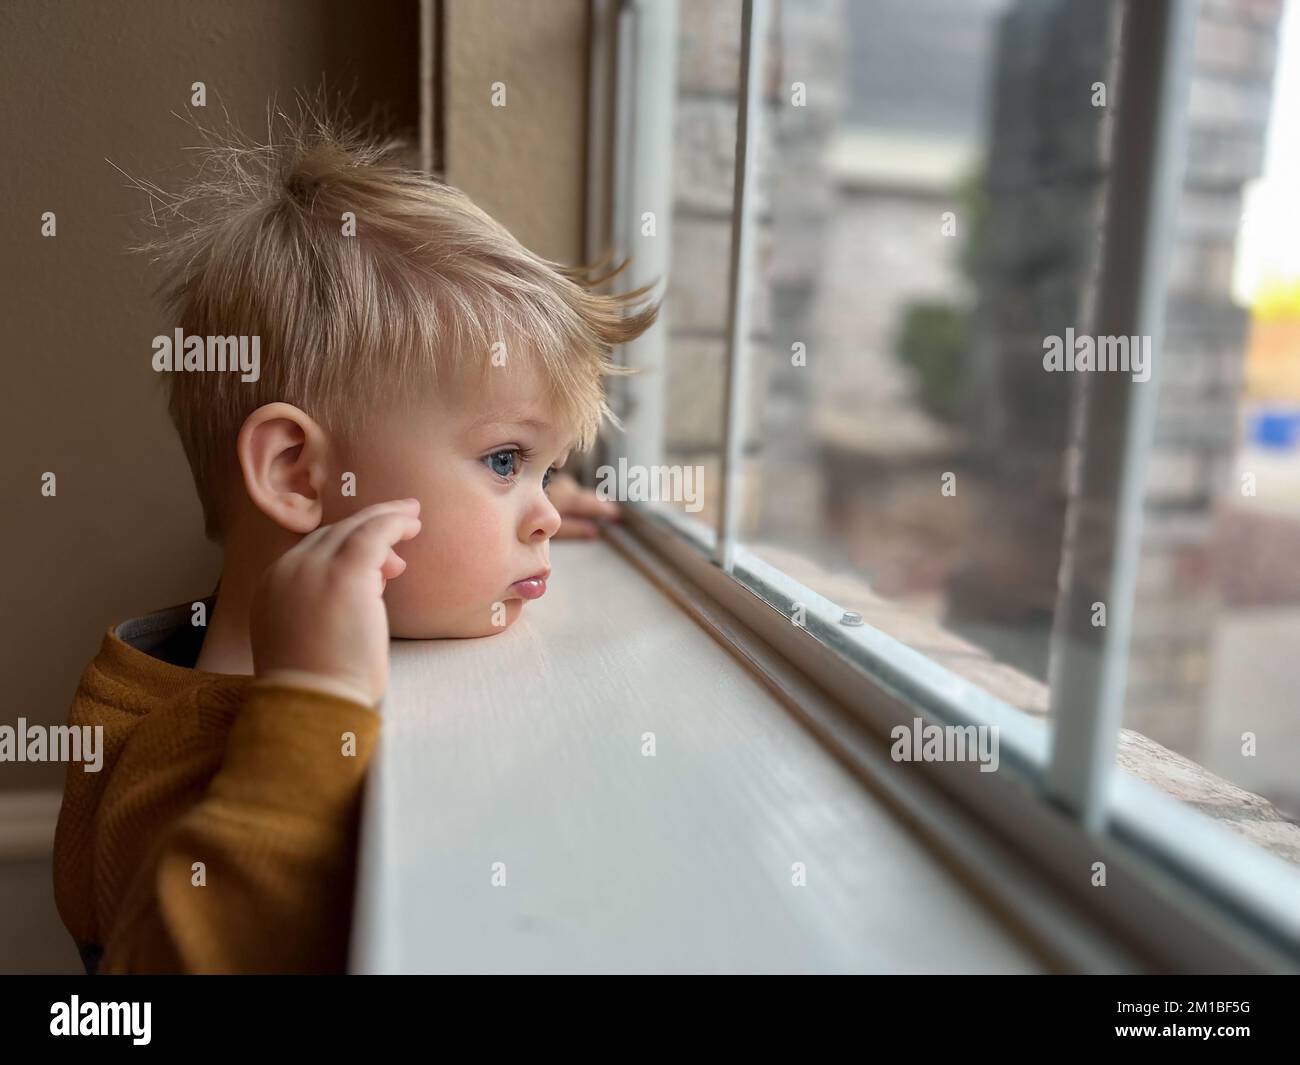 Cute little toddler looking at the window at home, close up portrait  Stock Photo